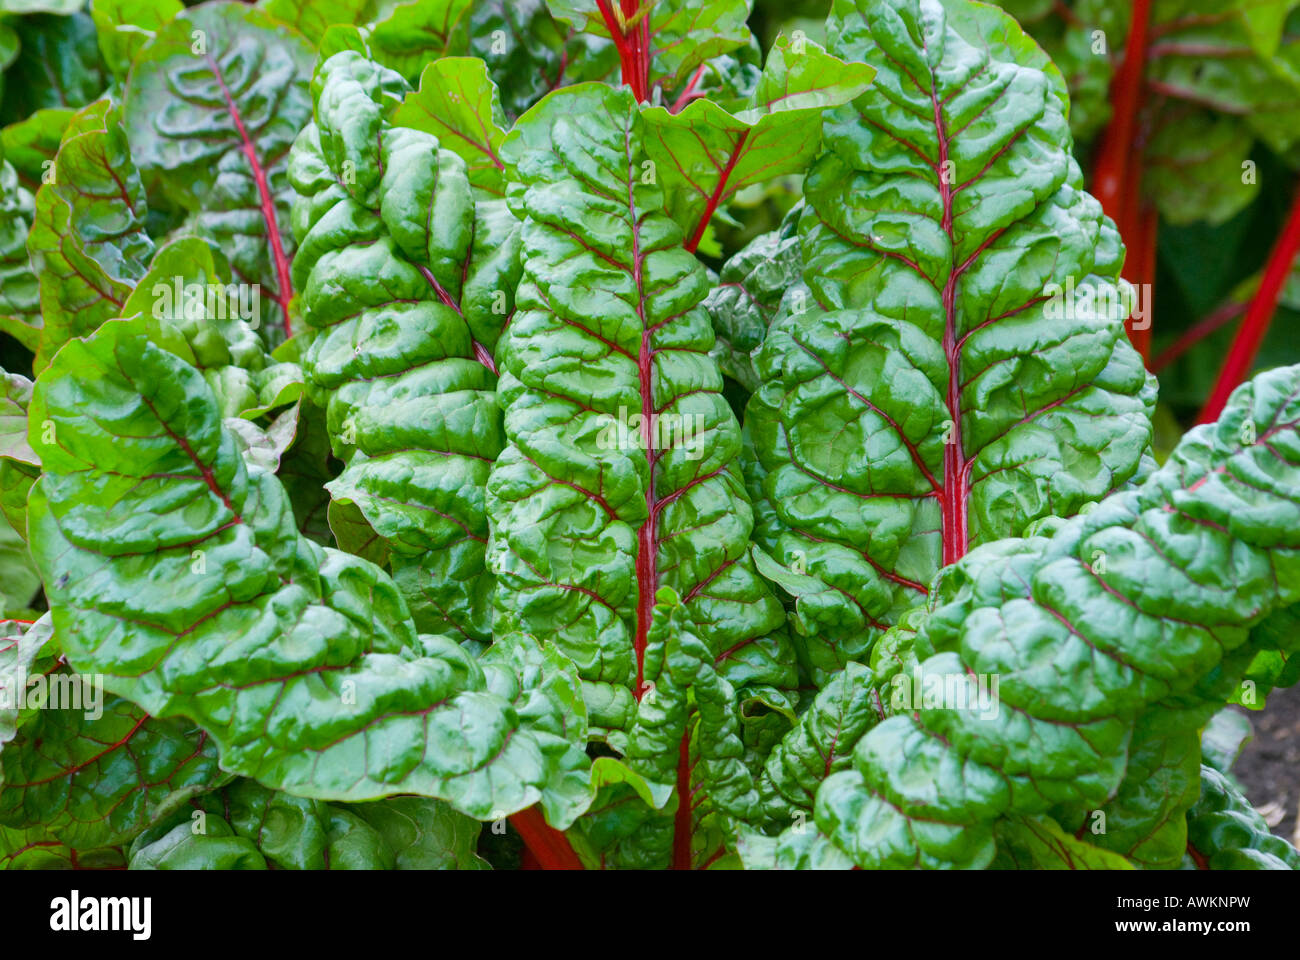 Red ribbed silver beet also known as Swiss chard Stock Photo